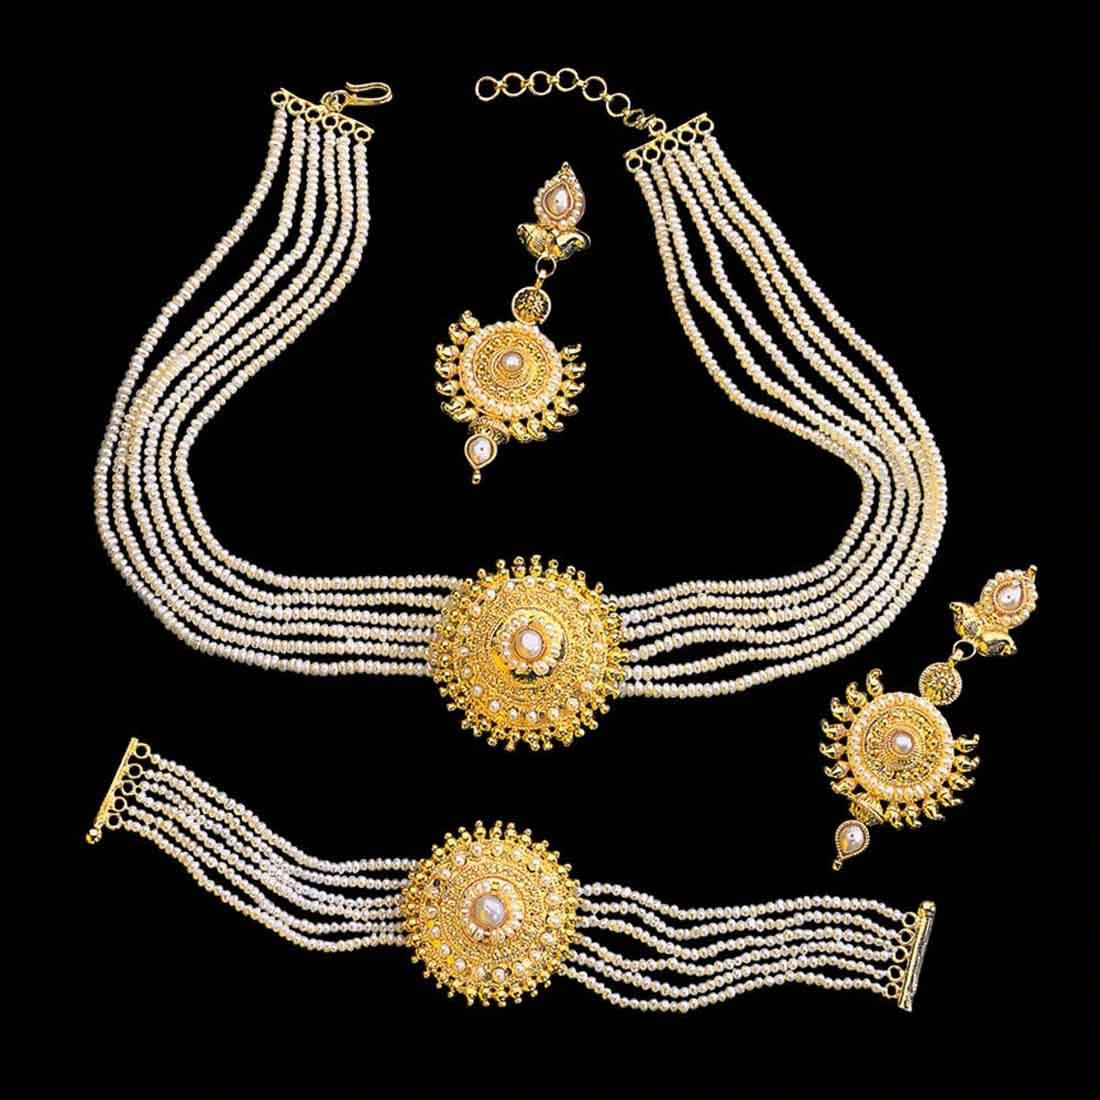 Shringar Special - Traditional Round Shaped Real Freshwater Pearl & Gold Plated Pendant Necklace, Bracelet & Earring Set for Women (SP127)